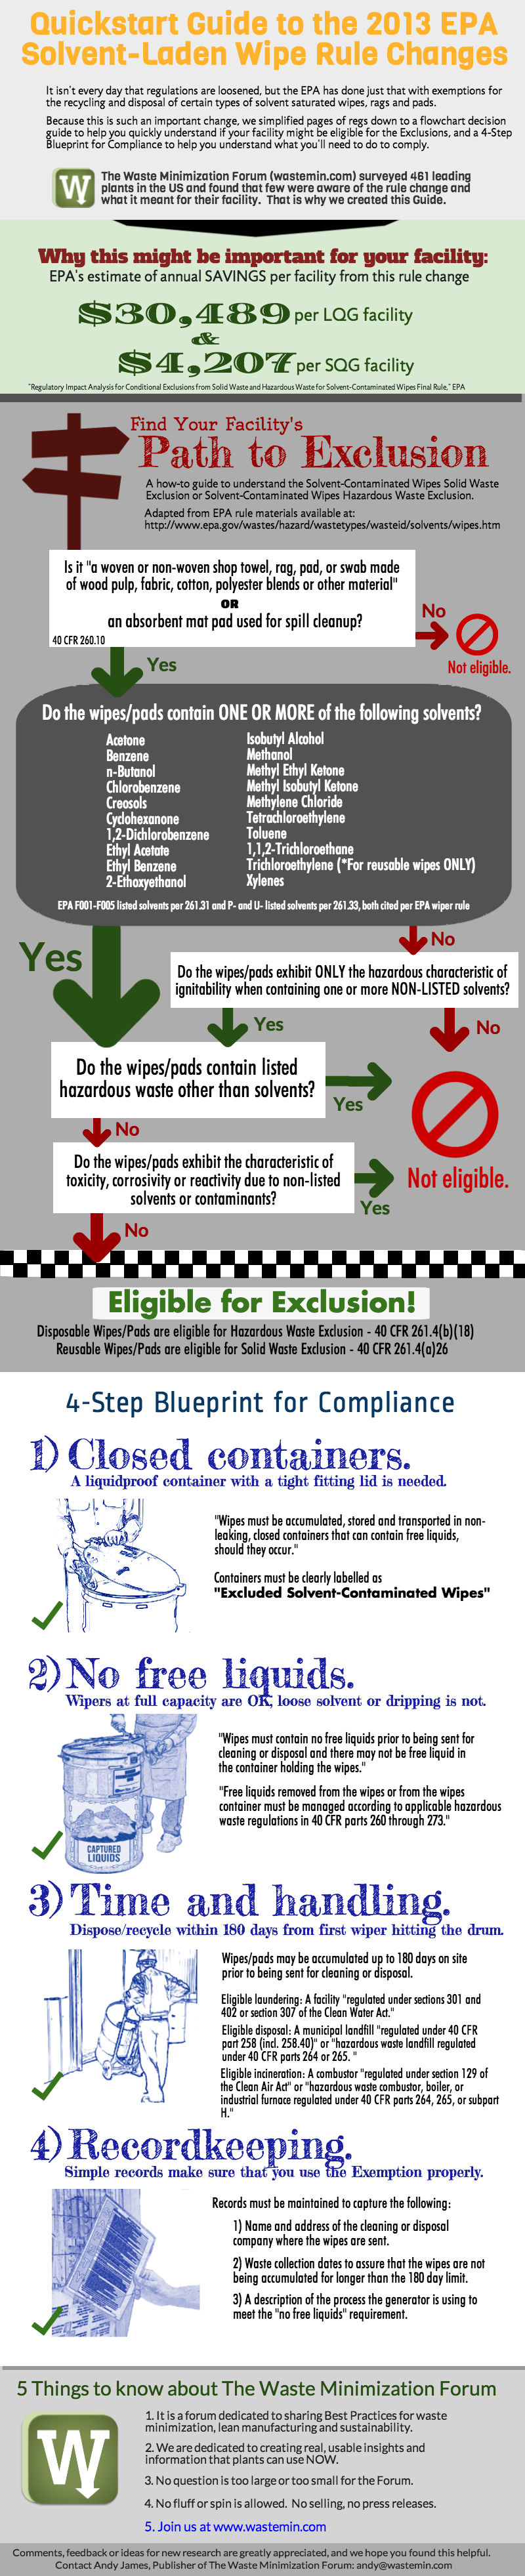 Quickstart Guide to the 2013 EPA Solvent-Laden Wipe Rule Infographic.png